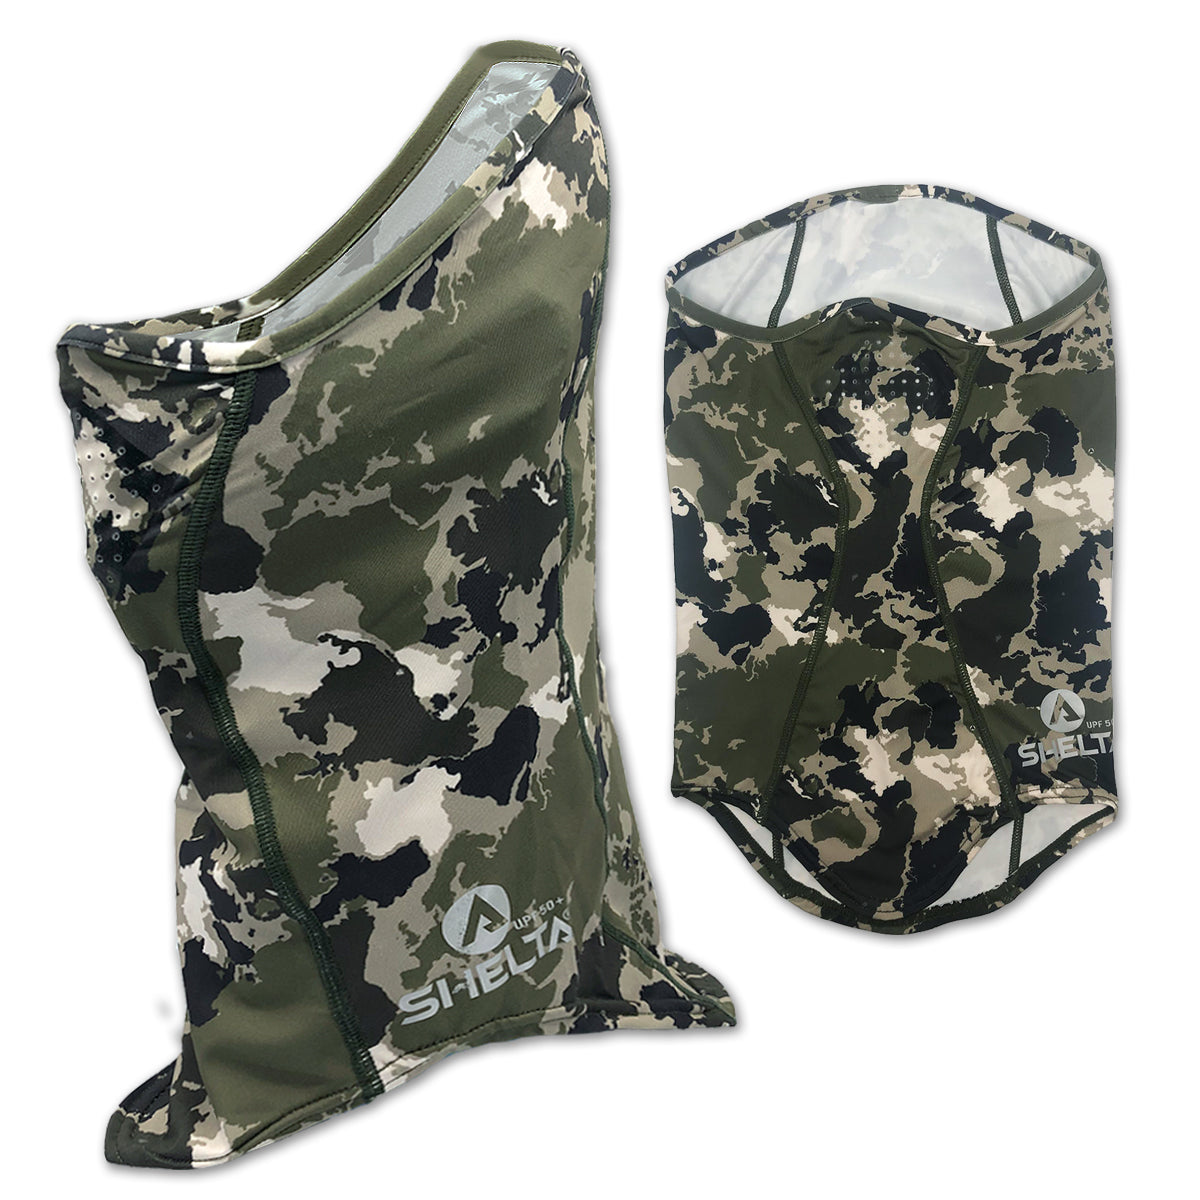 Our Face Gaiter in the KO Camo protects your face and neck from harmful UV rays. Sun protection that won’t wear off, it allows you to spend the whole day on the water or in the field without burning. Made from lightweight, moisture wicking stretch fabric, our gaiter features silicone coated laser-cut breathing holes.  The breathable fabric offers UPF 50+ UV protection and covers the top of your nose down to your neckline with enough height in the back to fit over a cap or under your sunhat.